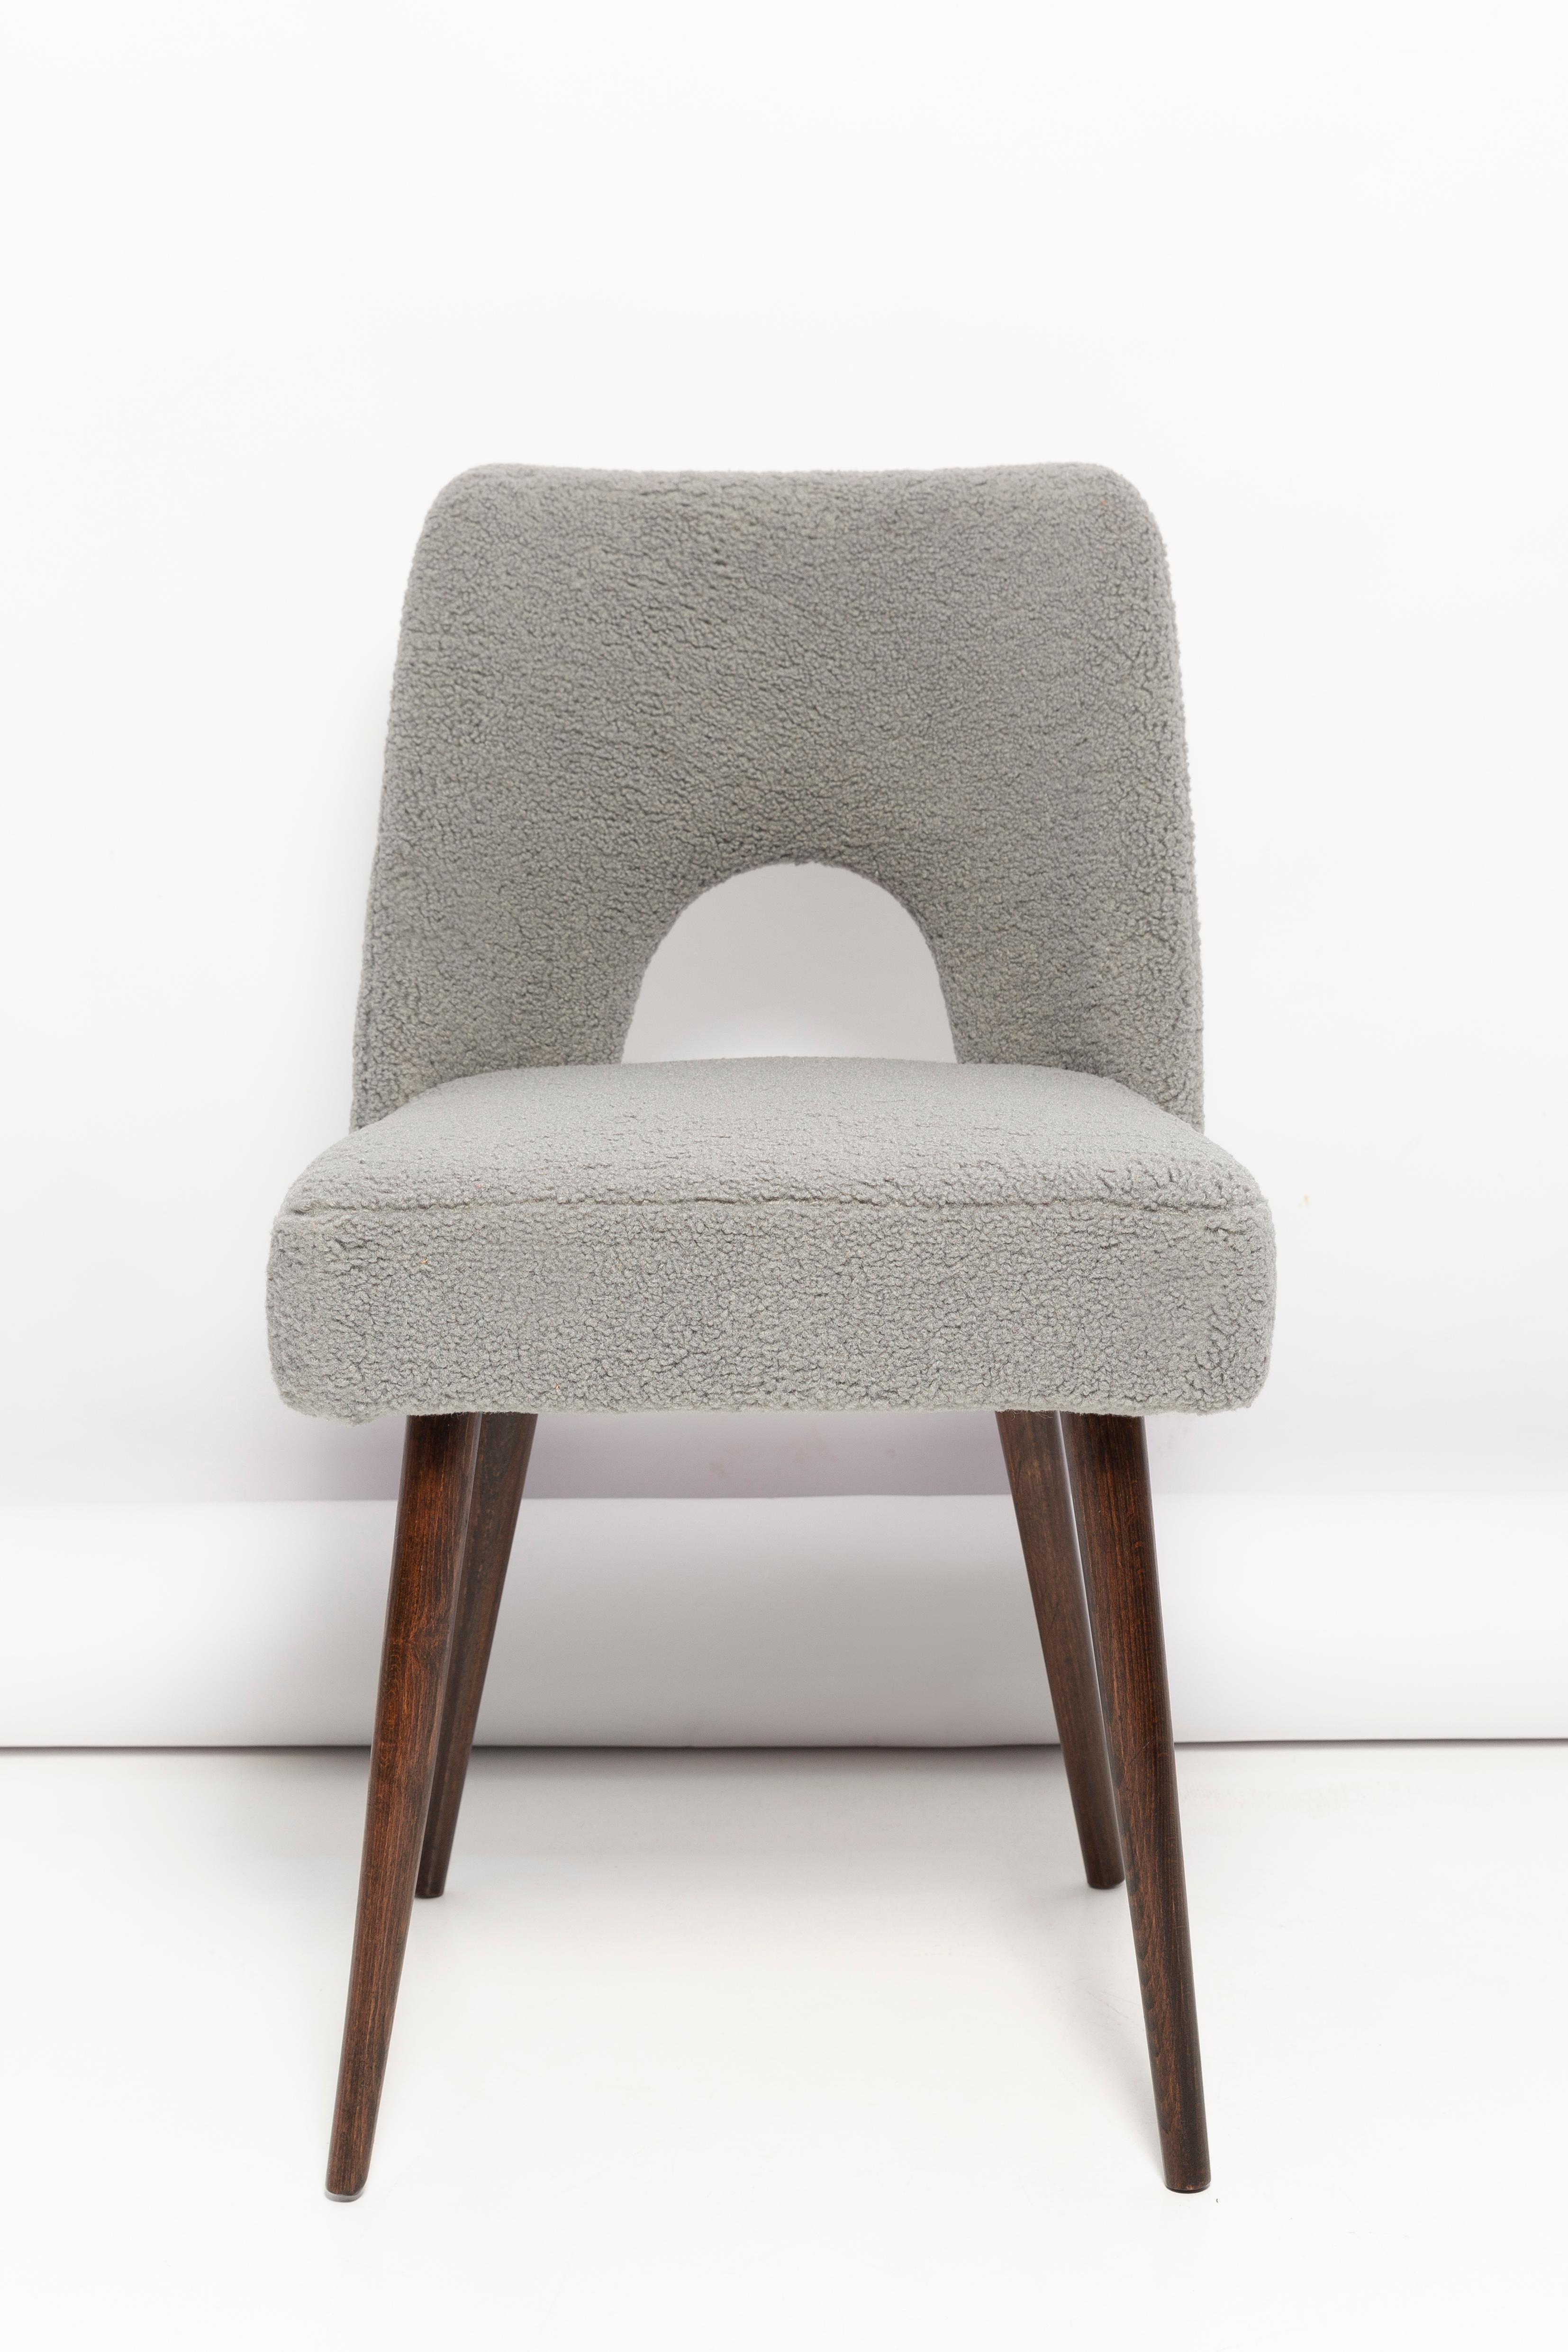 Set of Eight Gray Boucle 'Shell' Chairs, Dark Beech Wood, Europe, 1960s For Sale 4